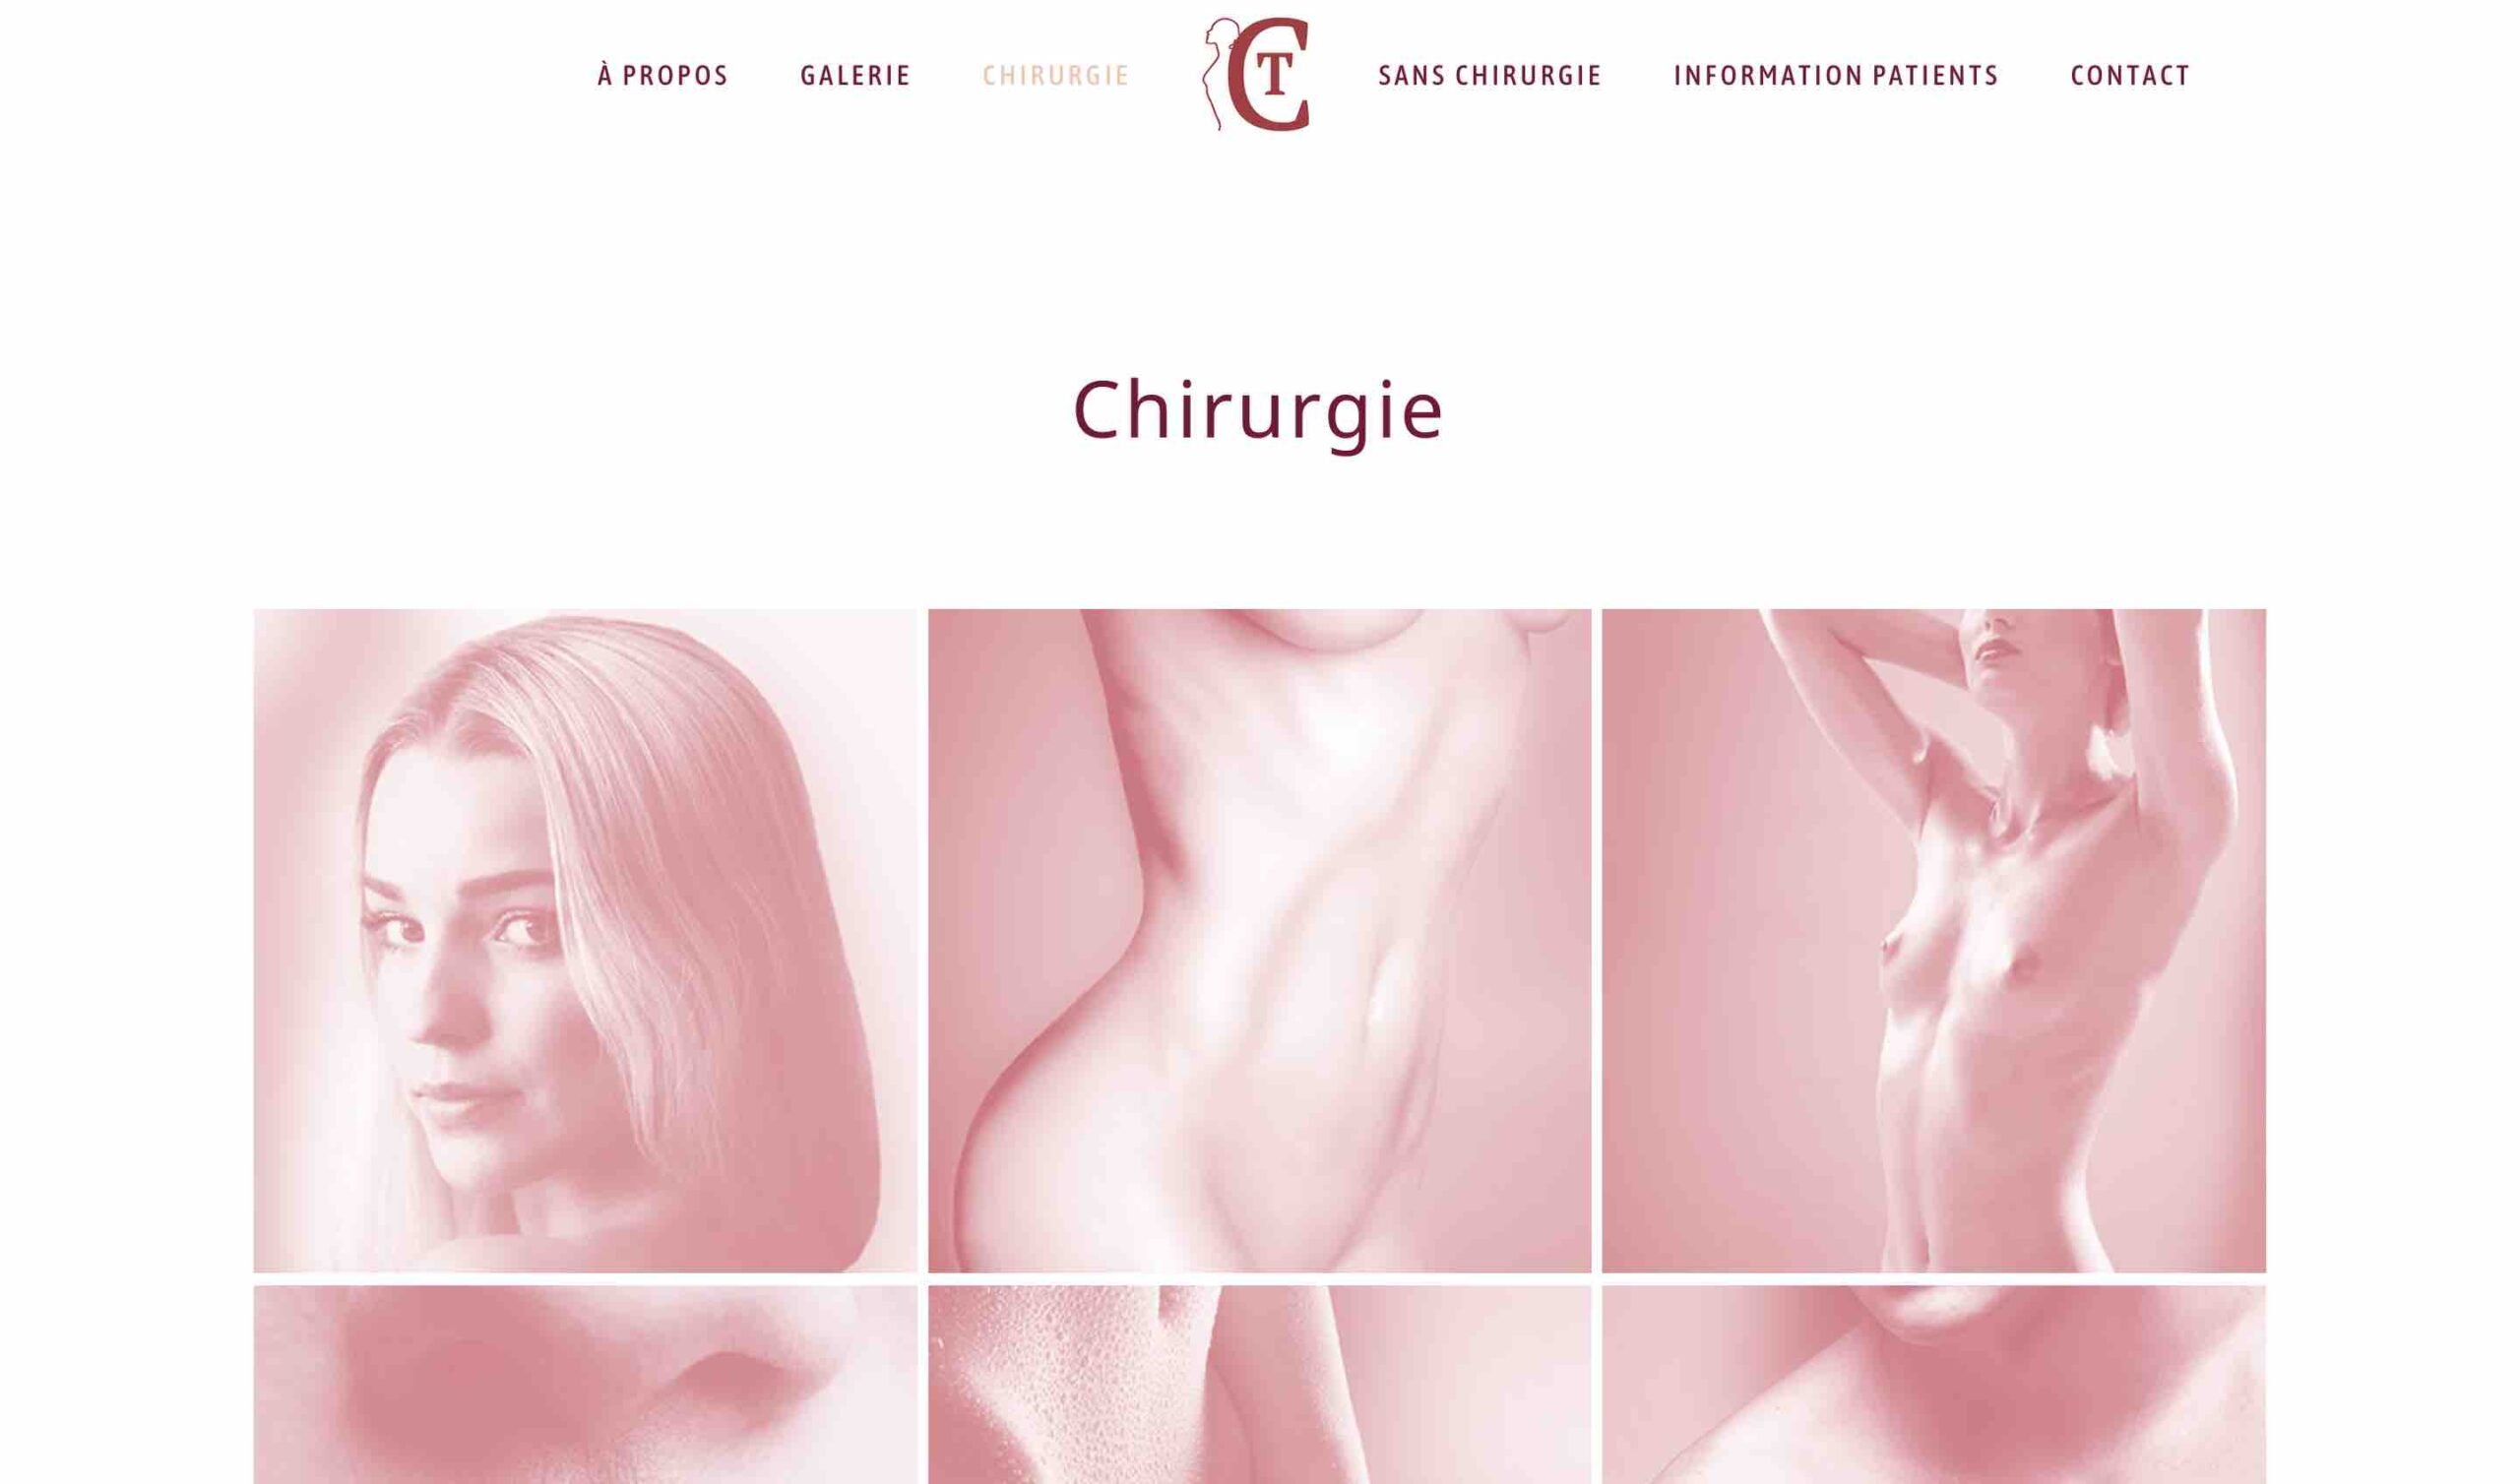 ANGELIQUE DAMOUR - projet DR COLSON - page chirurgie